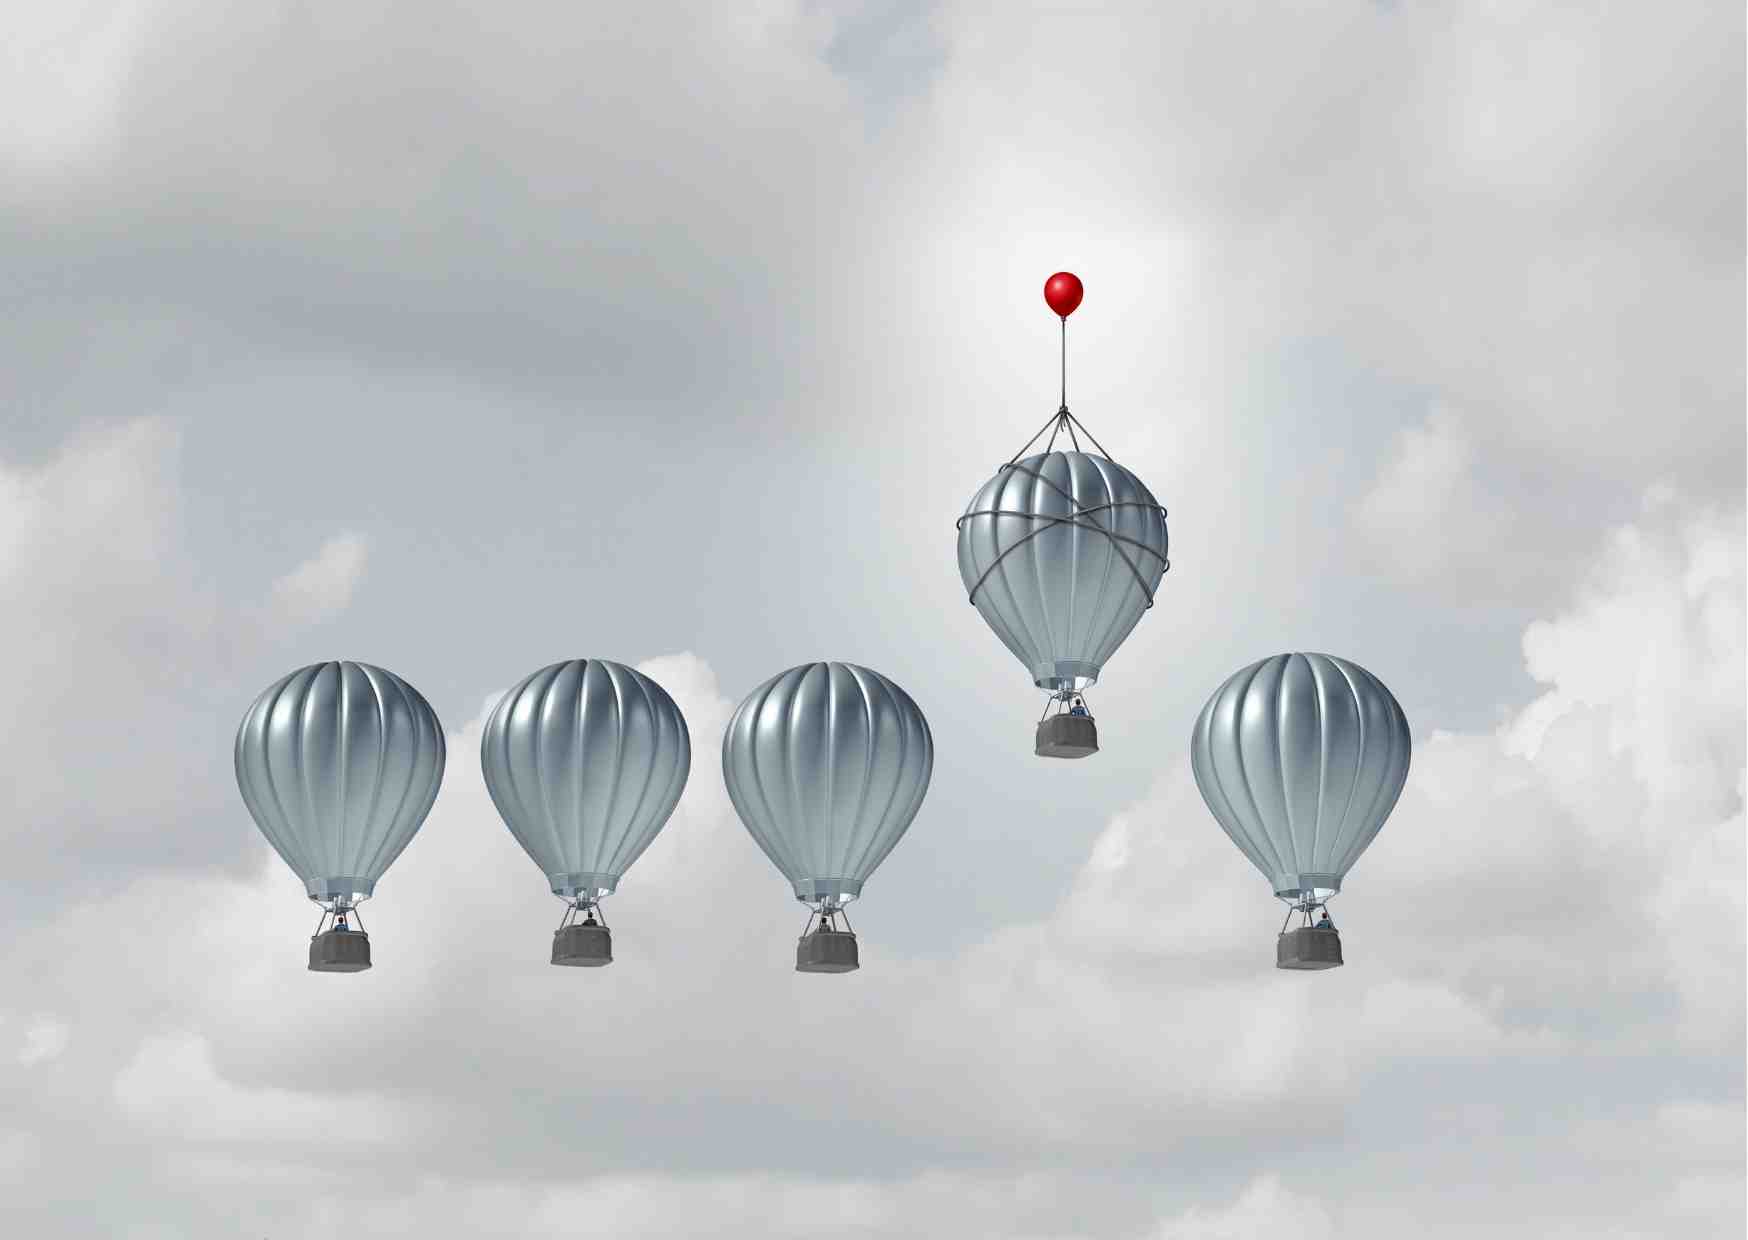 A picture of 5 hot air balloons in line with one being raised above the rest by a small red balloon 